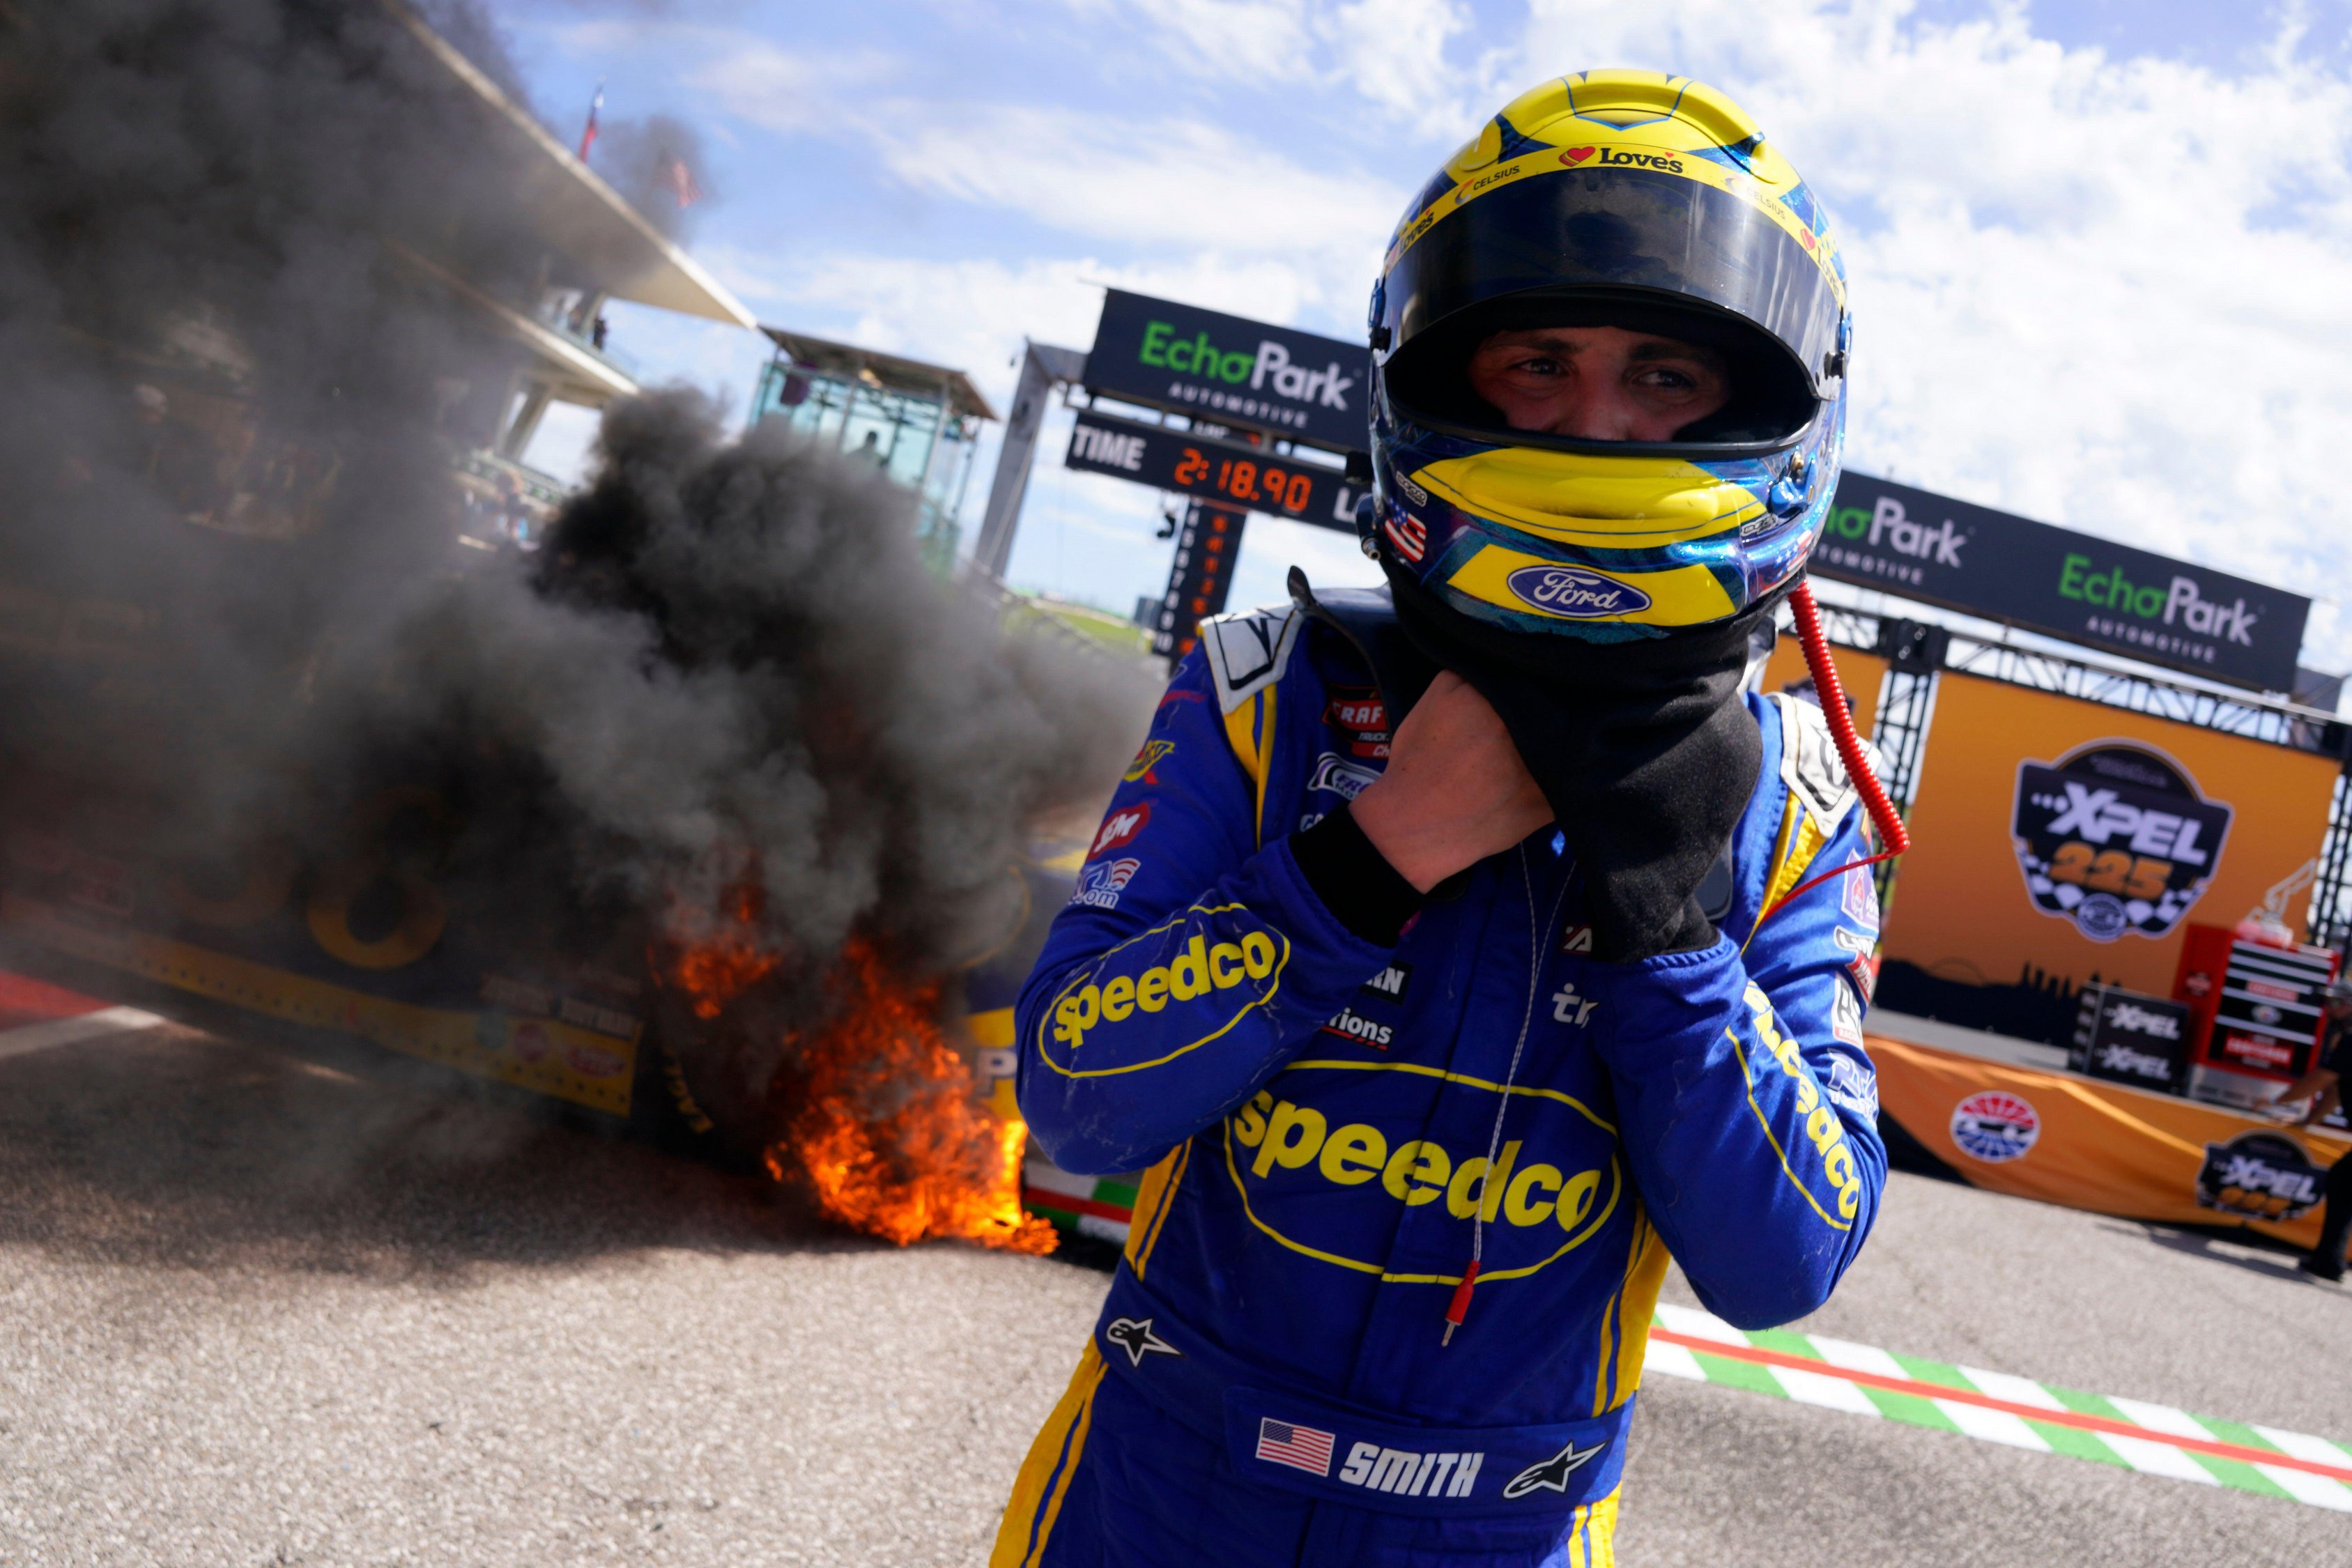 , ‘Might want to put that out’ – Watch Nascar winner’s car burst into FLAMES after celebratory burnout leaves fans baffled